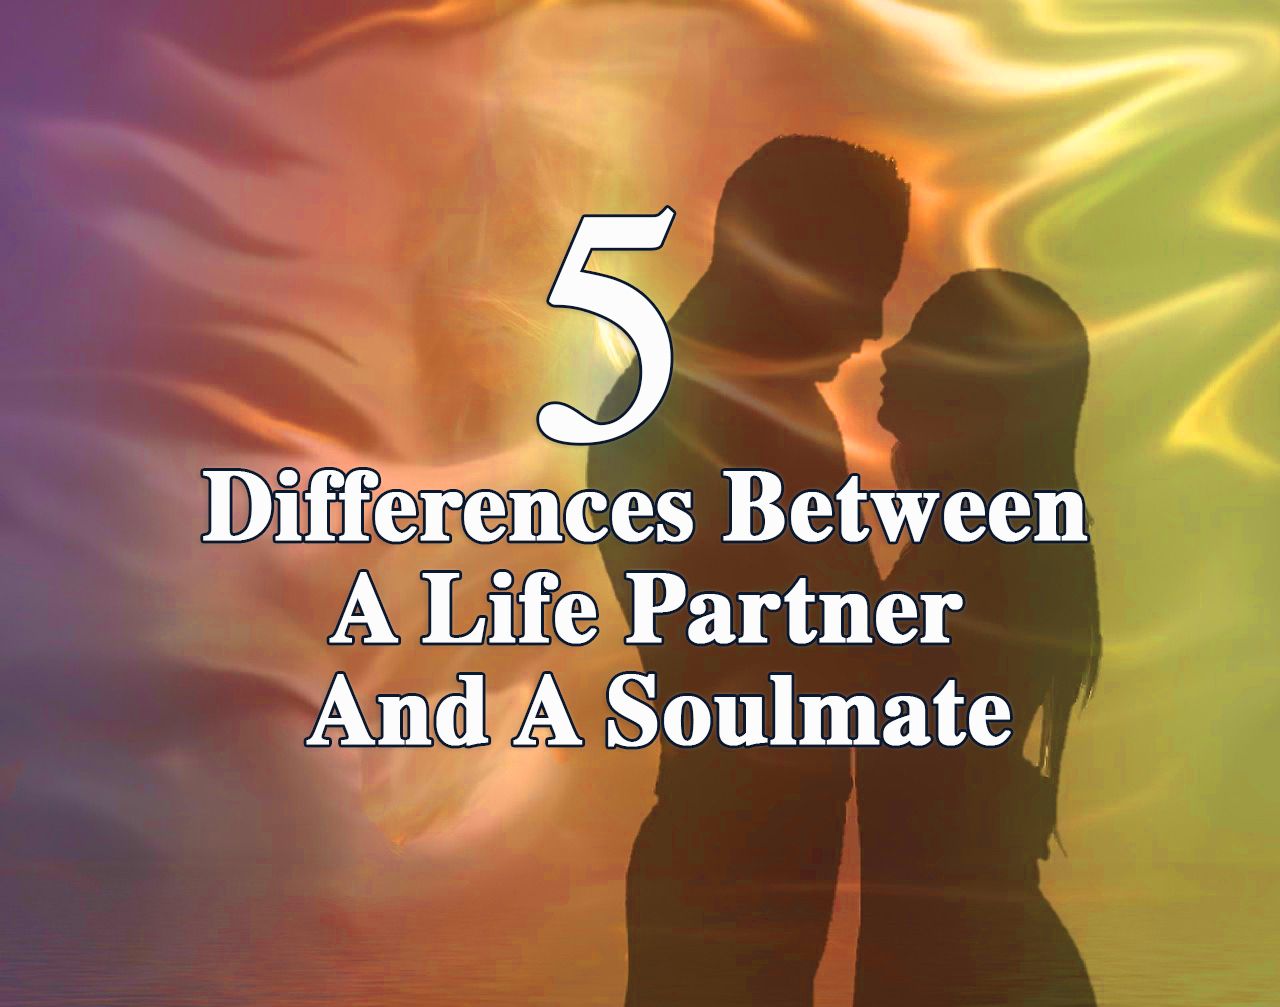 5 Differences Between A Life Partner And A Soulmate